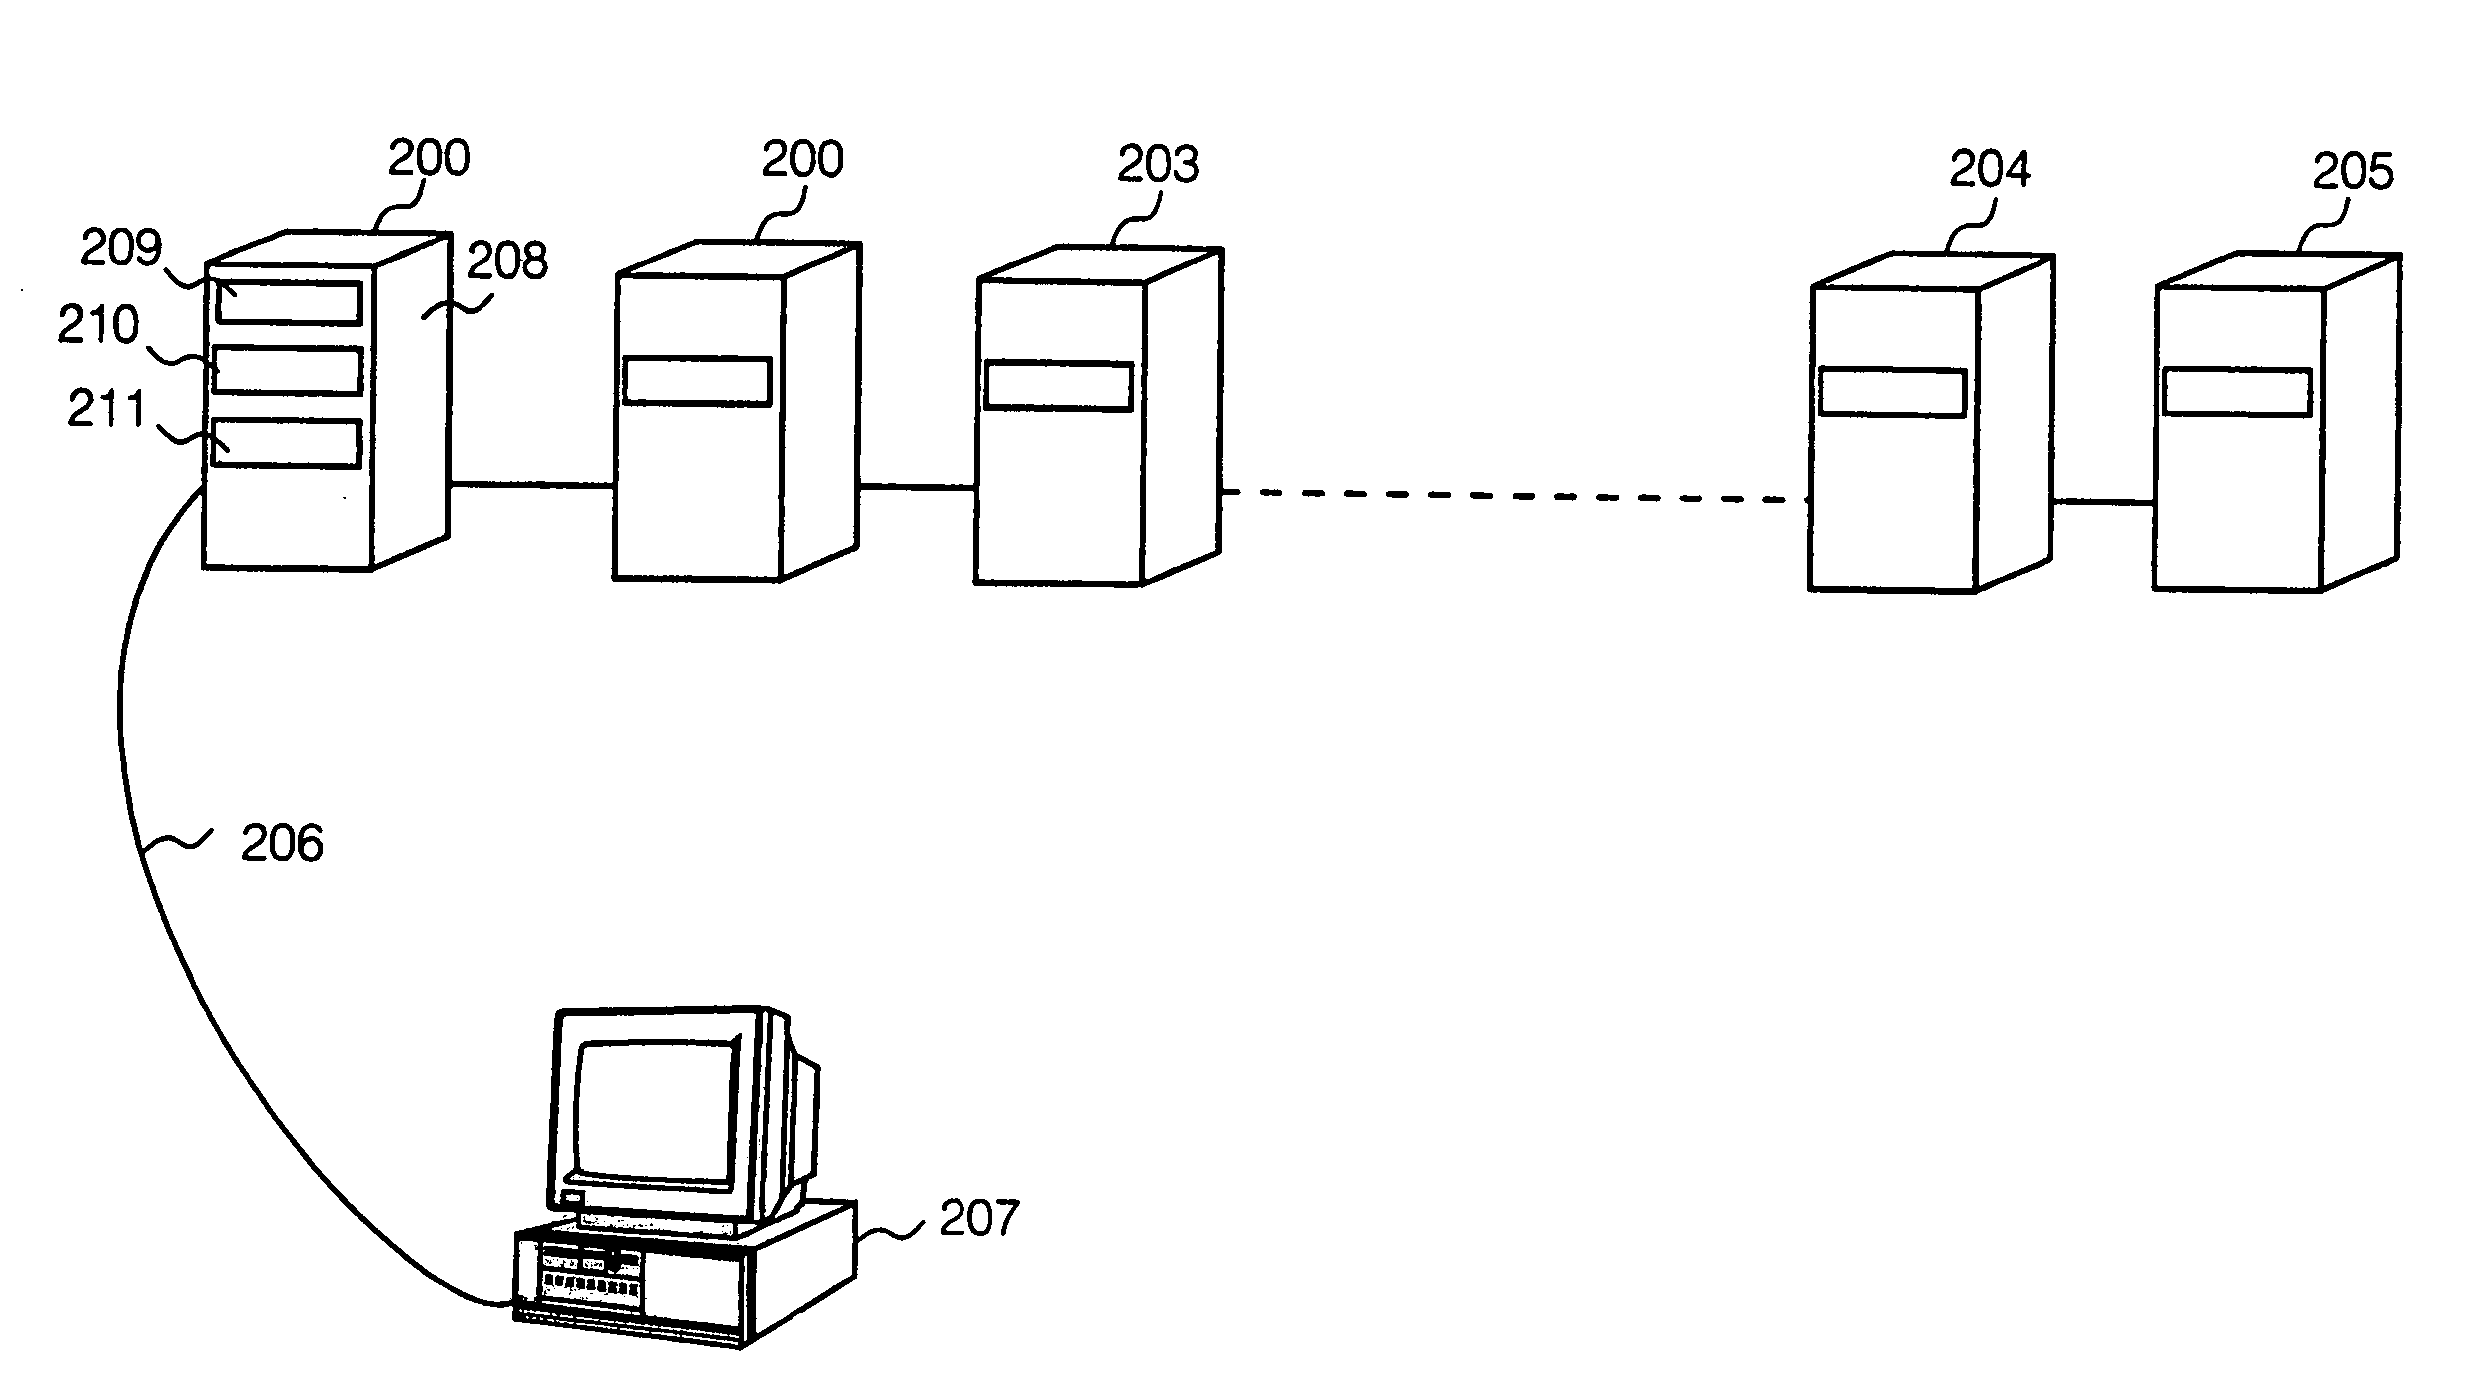 Aggregation of multiple headless computer entities into a single computer entity group